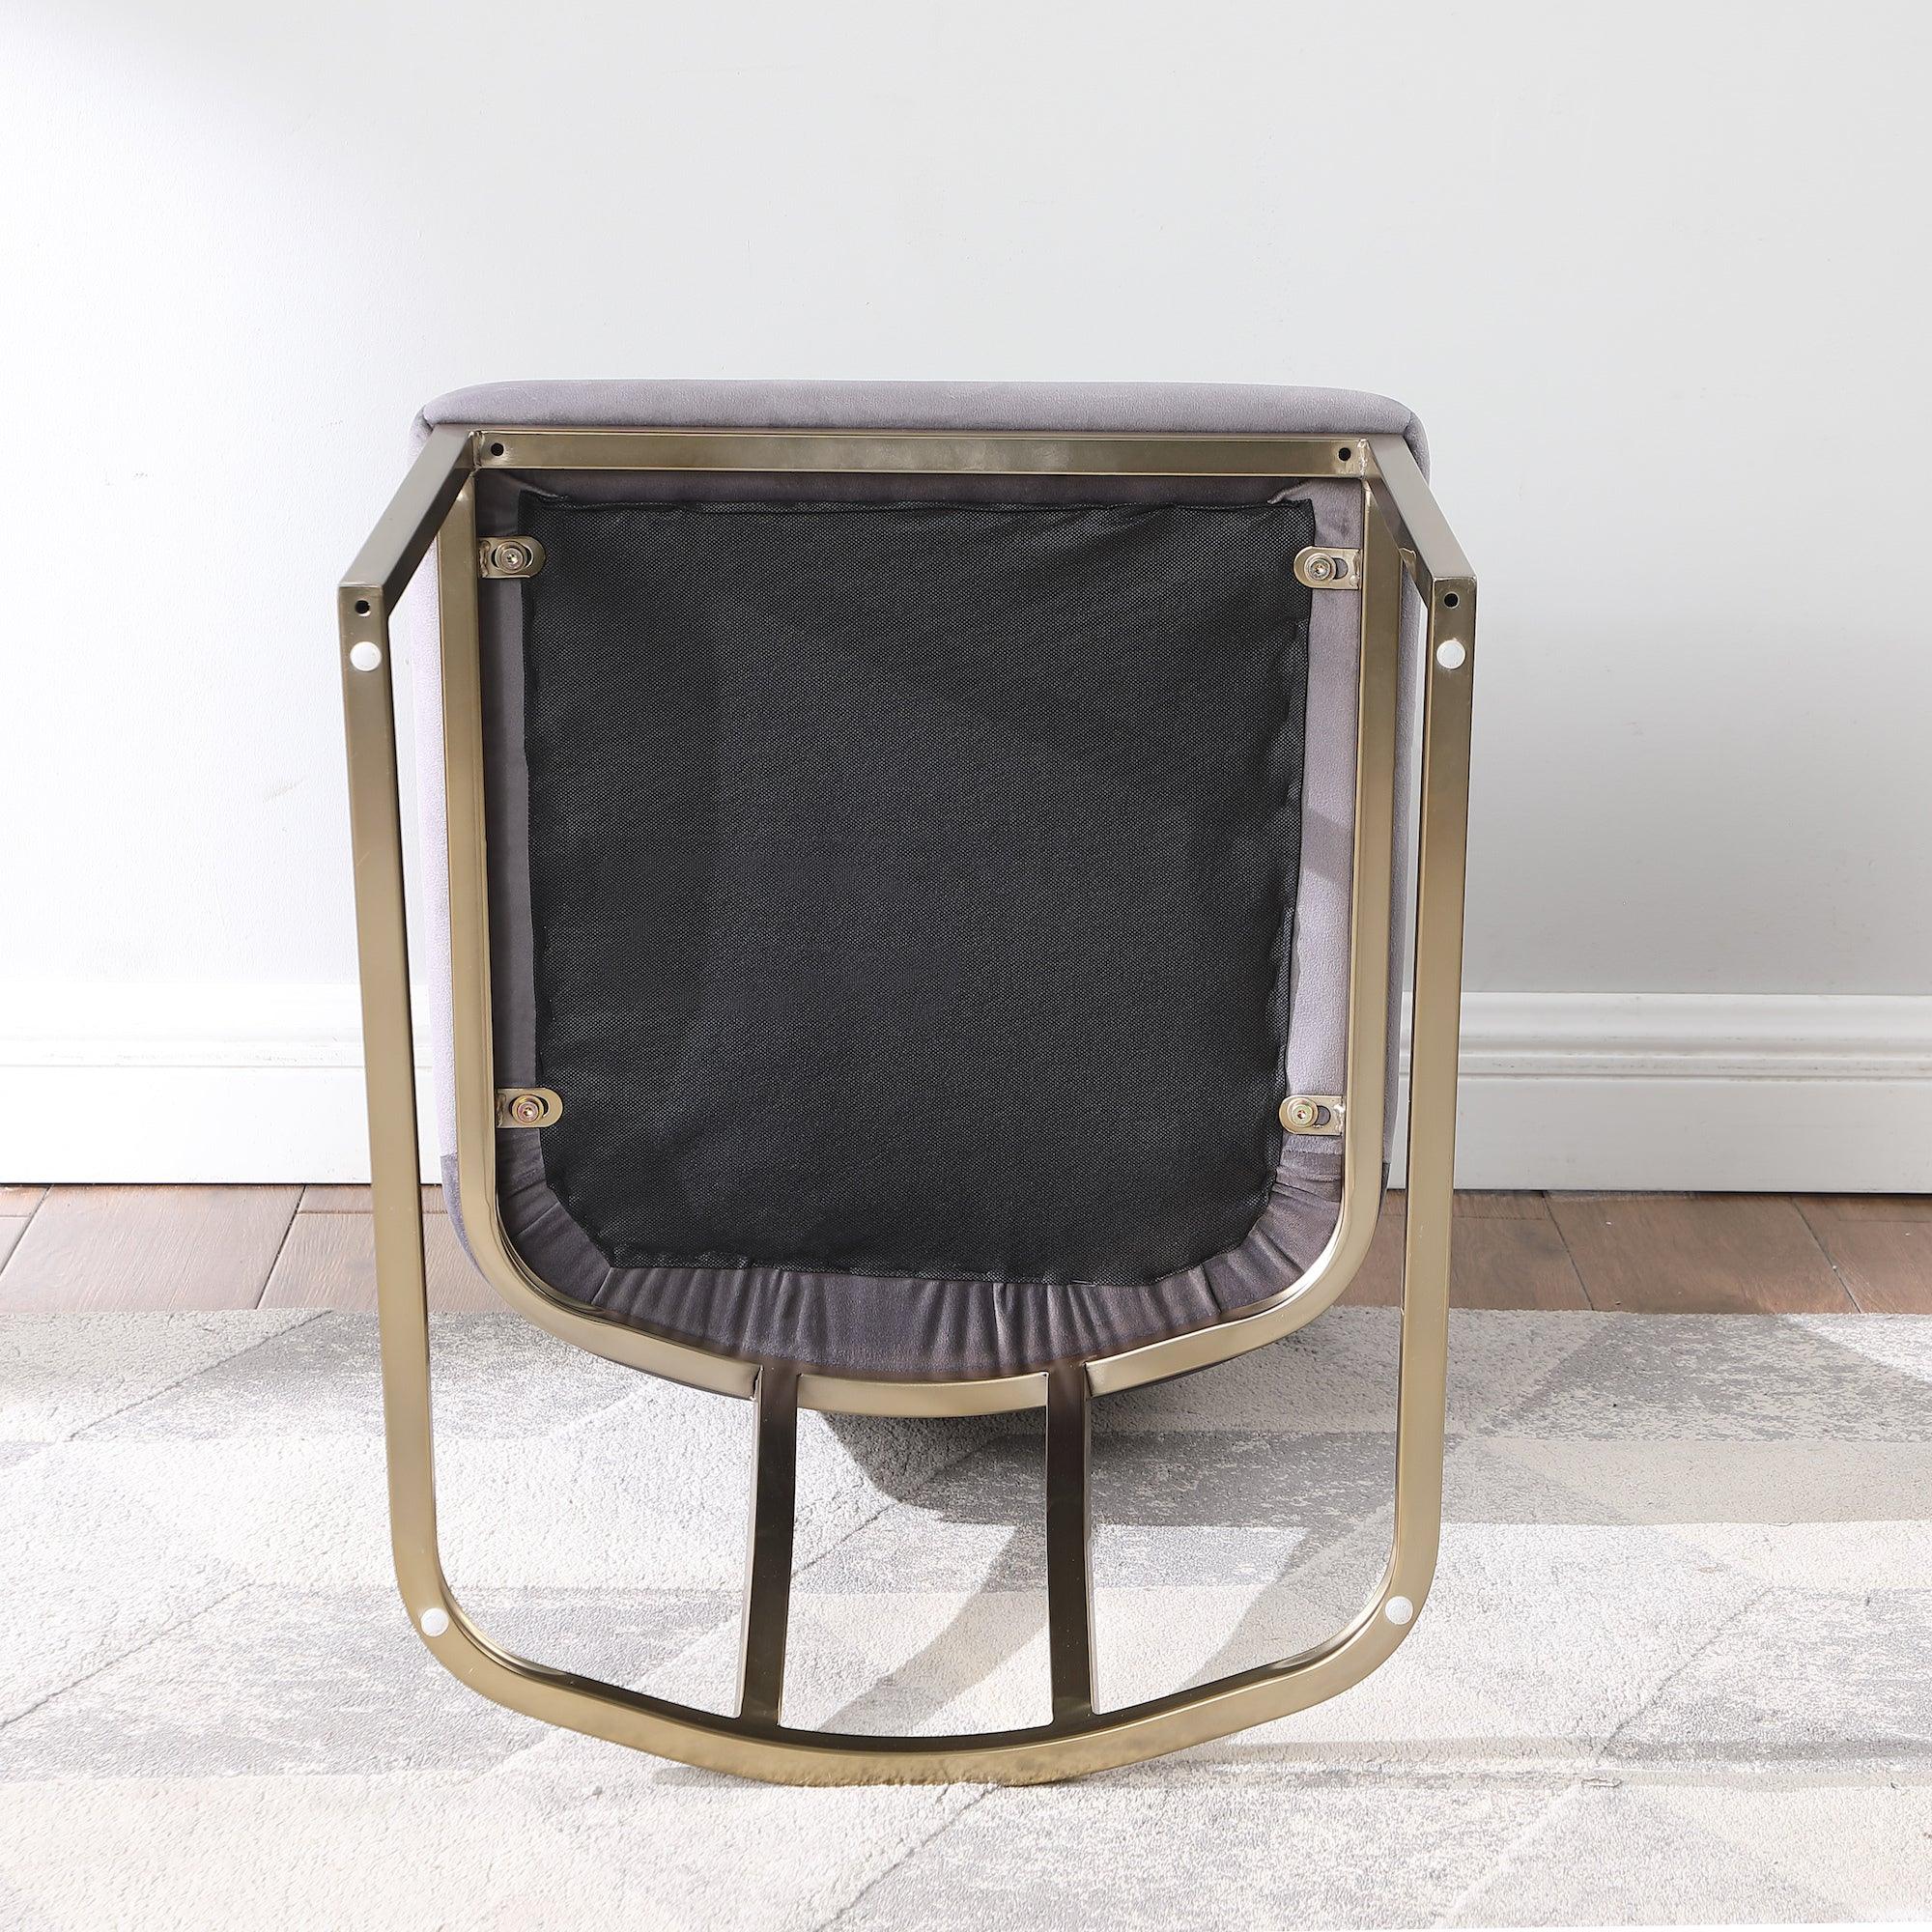 Dining Chairs, Velvet Upolstered Side Chair, Gold Metal Legs (Set of 2) - Gray